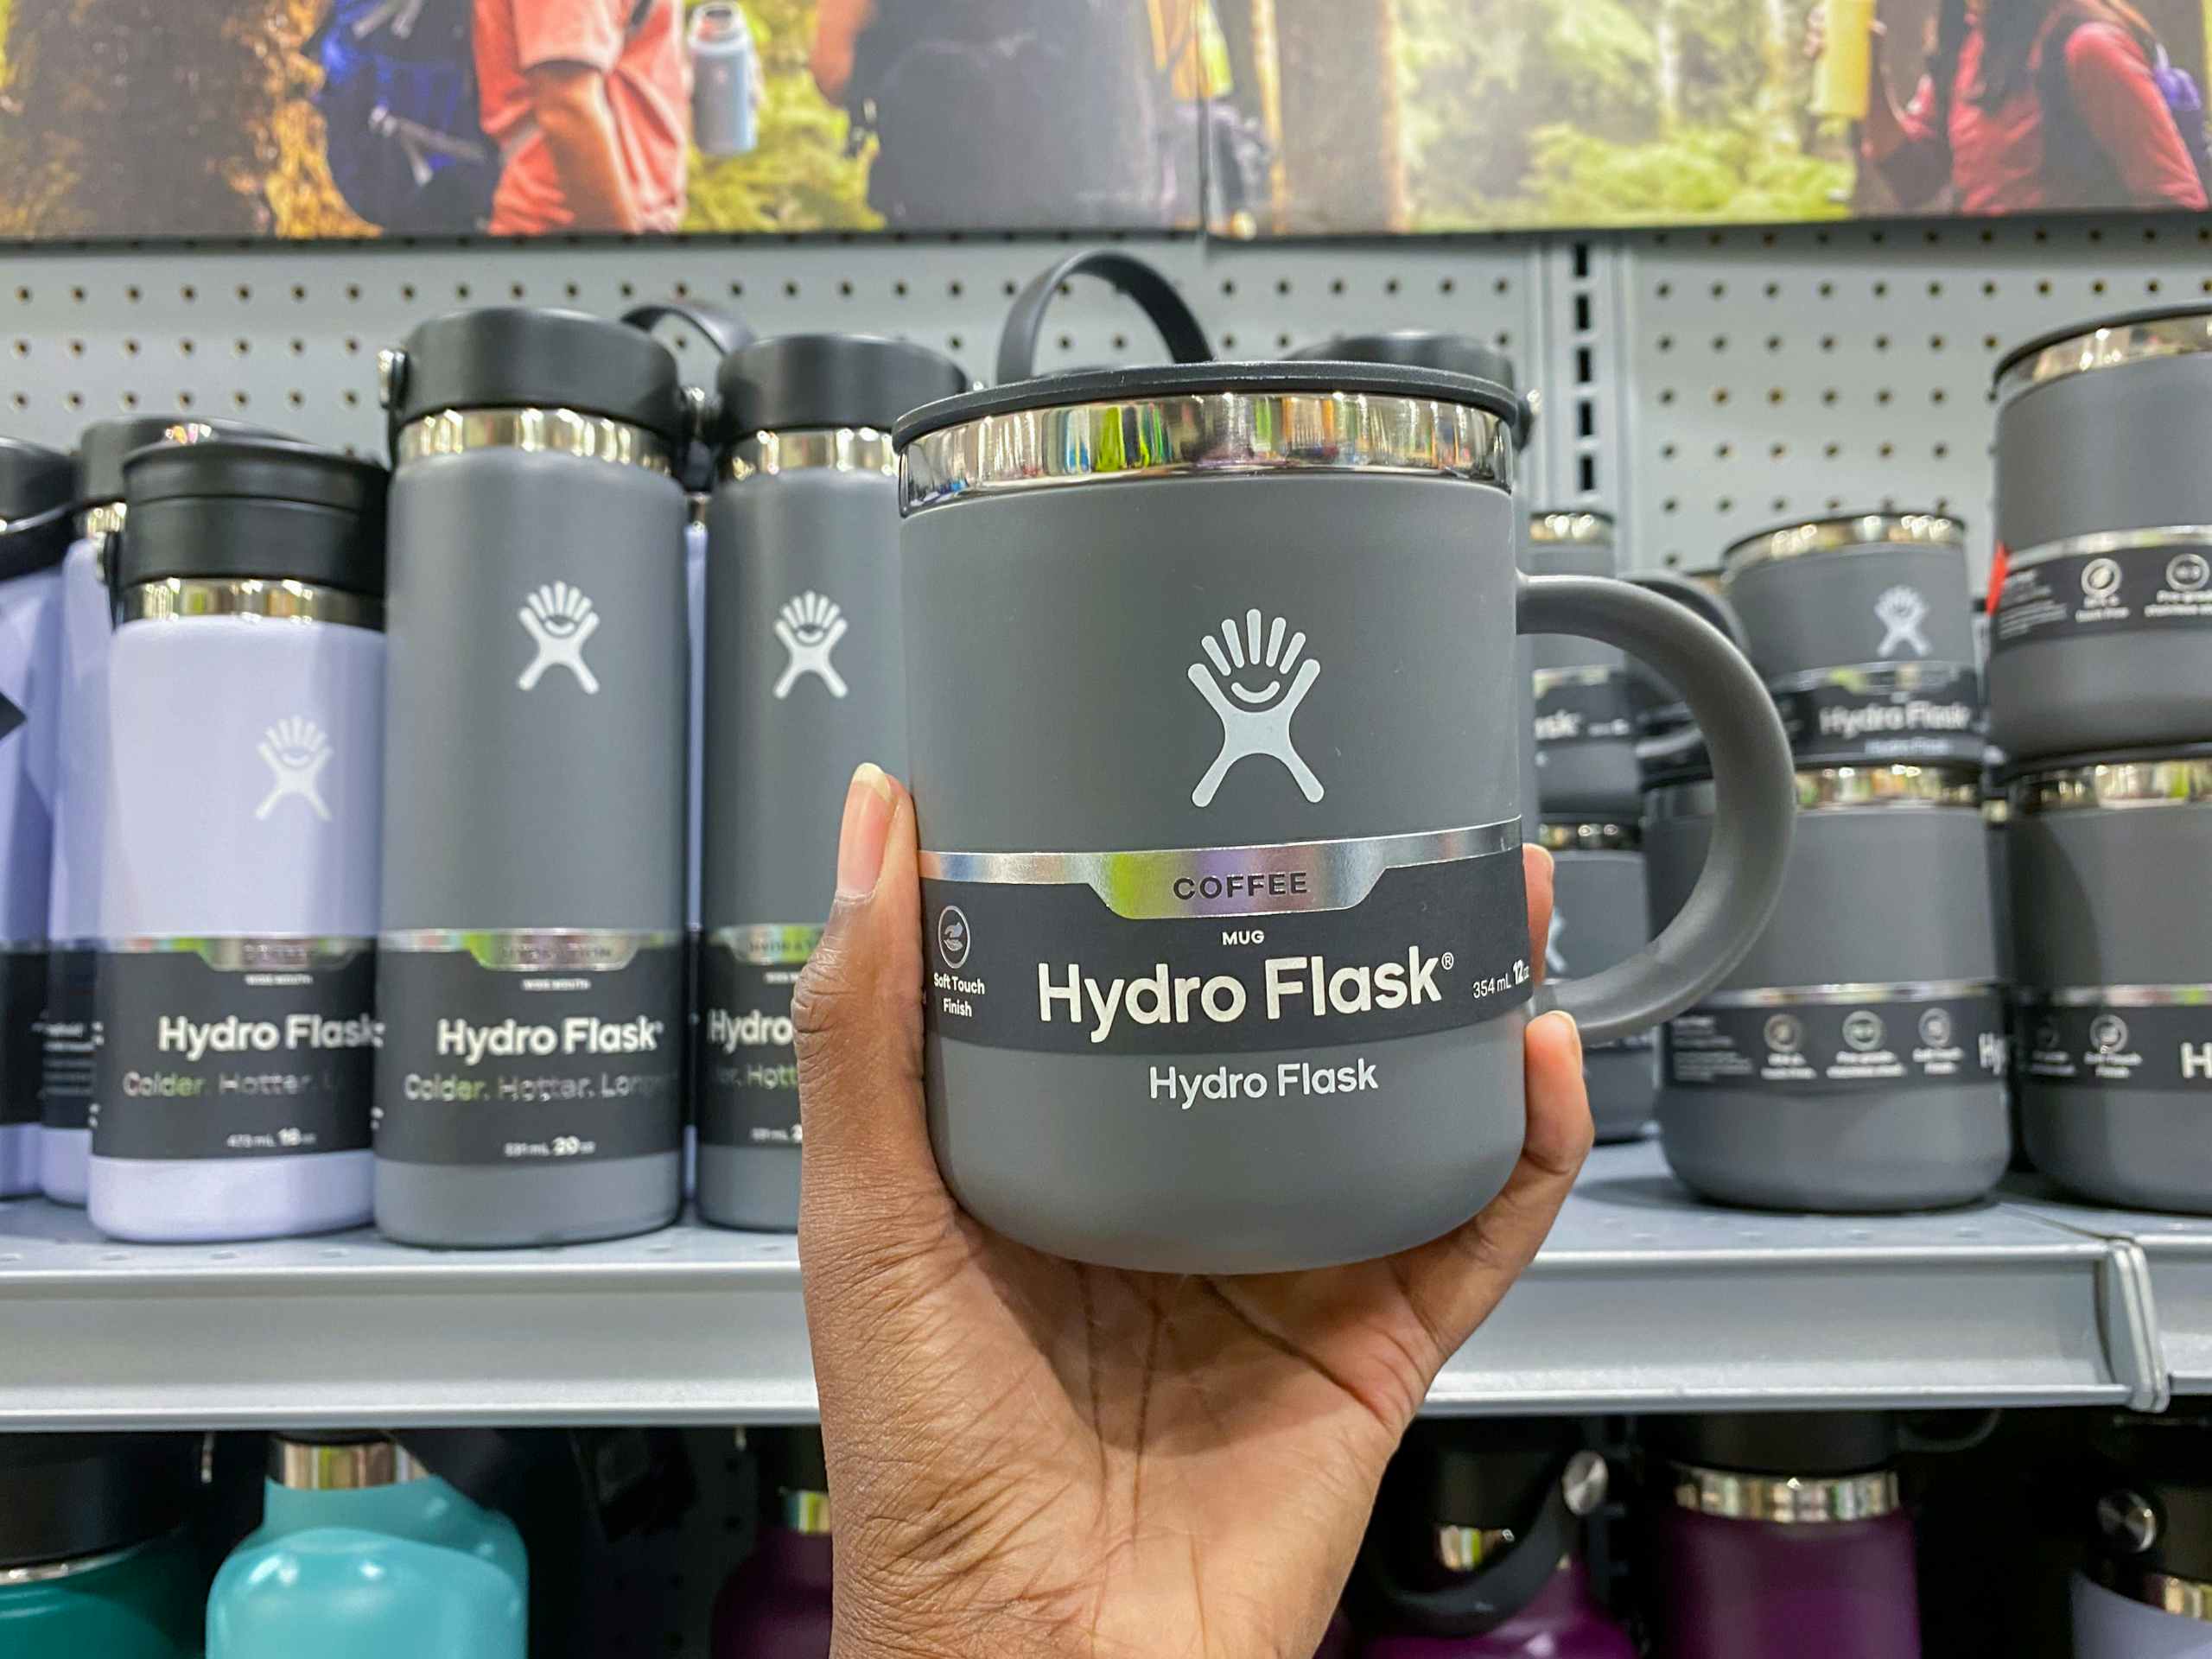 a hydroflask being held in front of a display of other hydrflasks